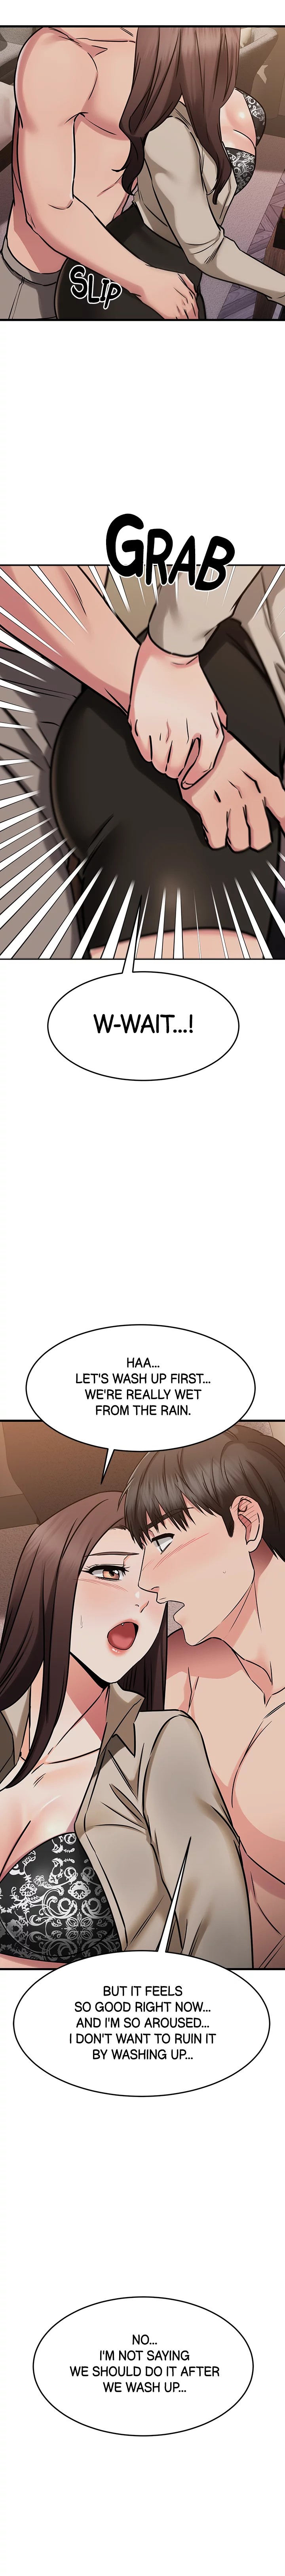 My female friend who crossed the line Chapter 51 - Page 11